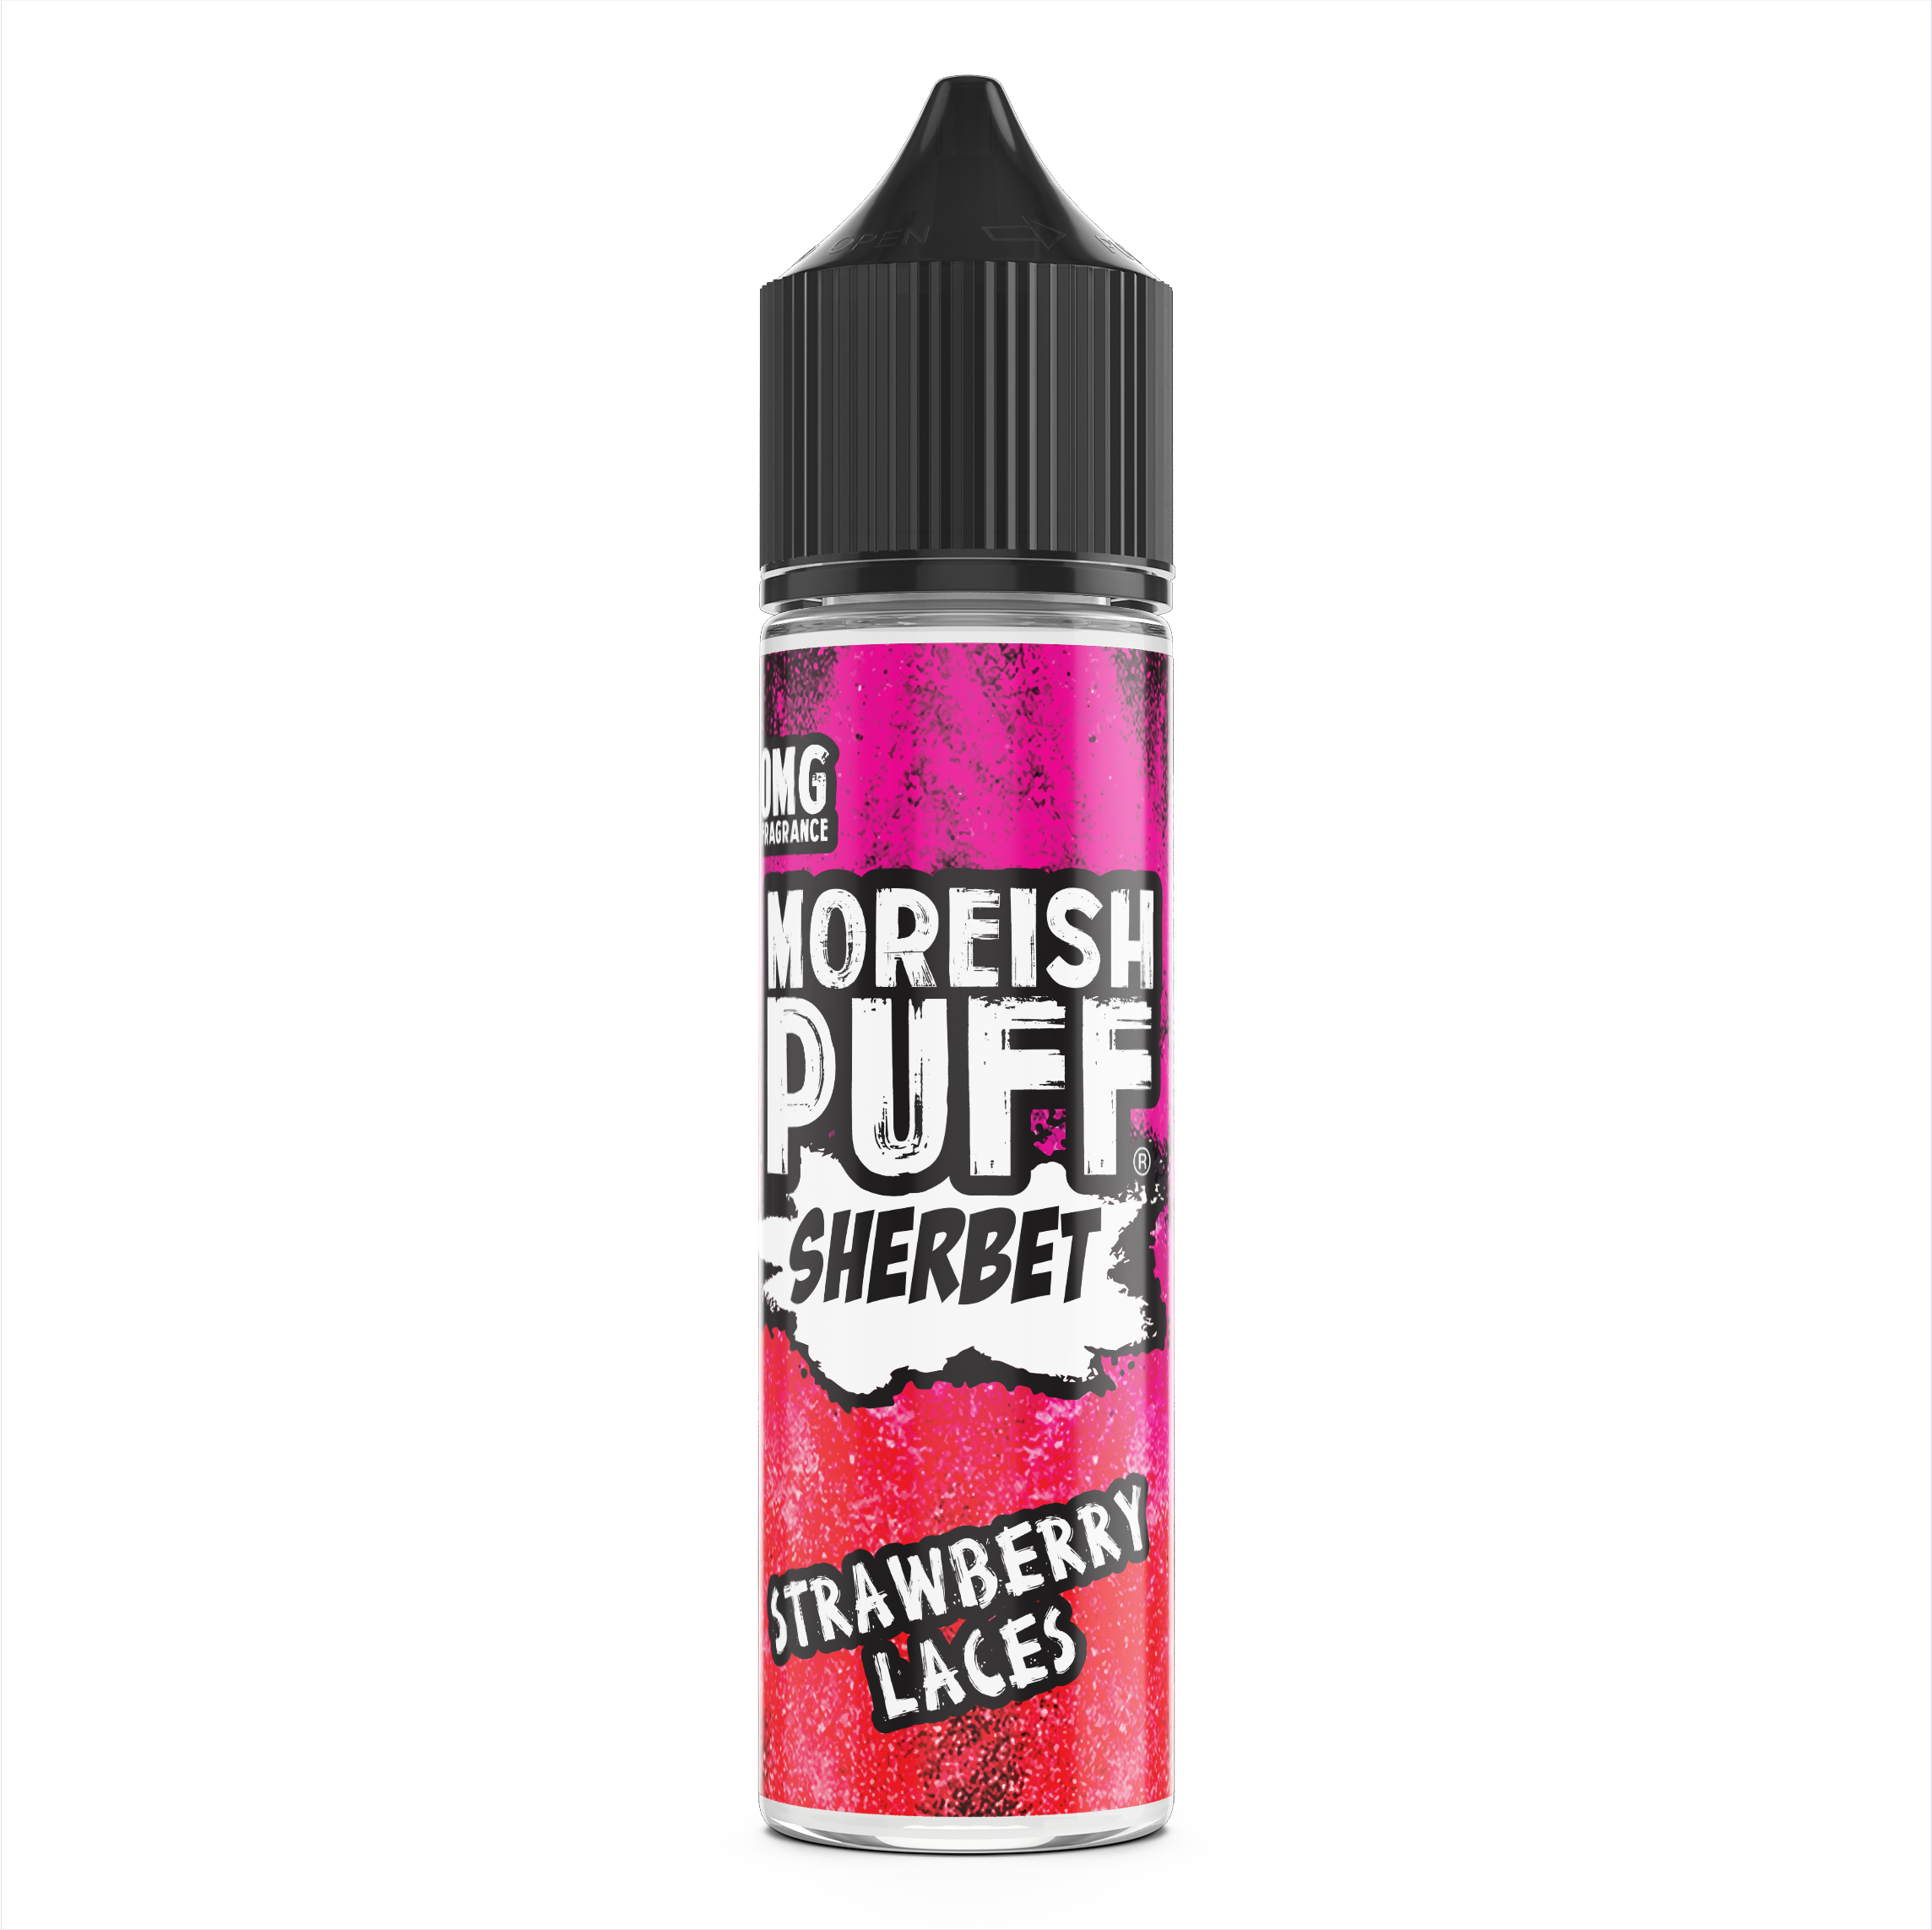 Strawberry Laces Sherbet E-Liquid by Moreish Puff 50ml Short Fill